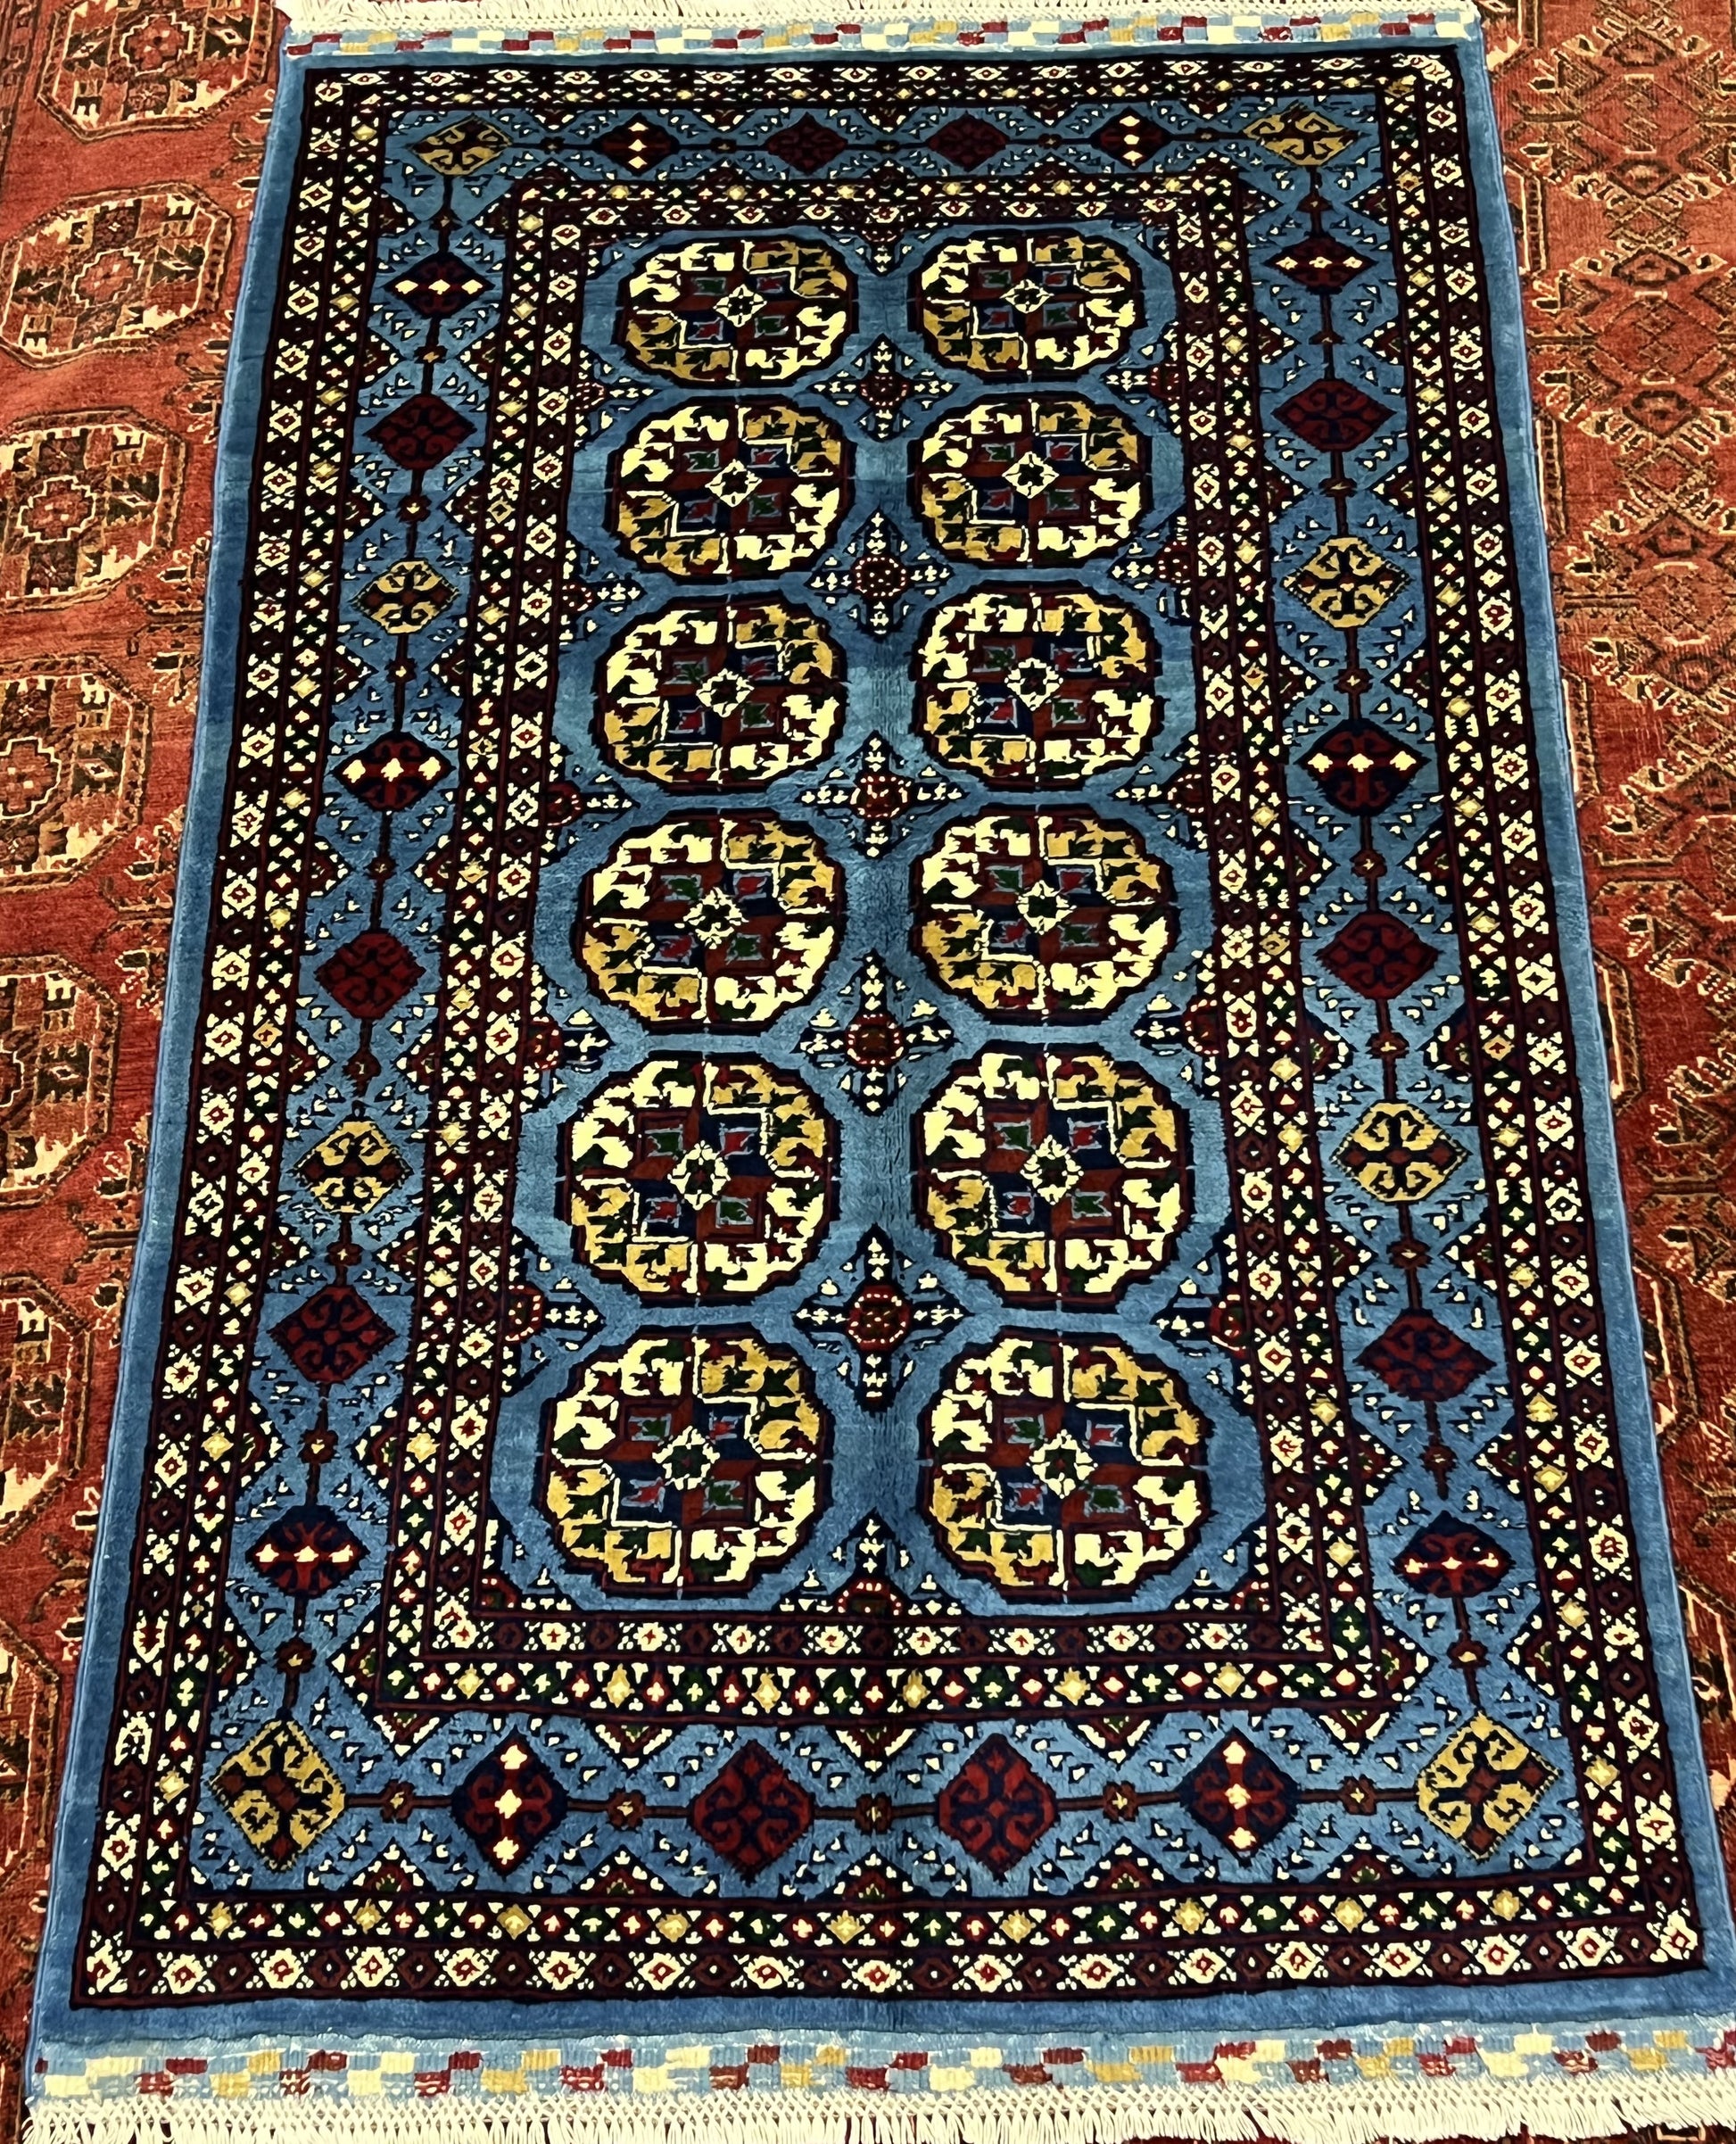 Afghan Hand Knitted/Knotted Living / Dining Room Wool Woven Rug Size 5ft x 3ft or 163x99 cm  (AG-M-5x3-B-N) Marinous Ahal Gul - Kabul Rugs